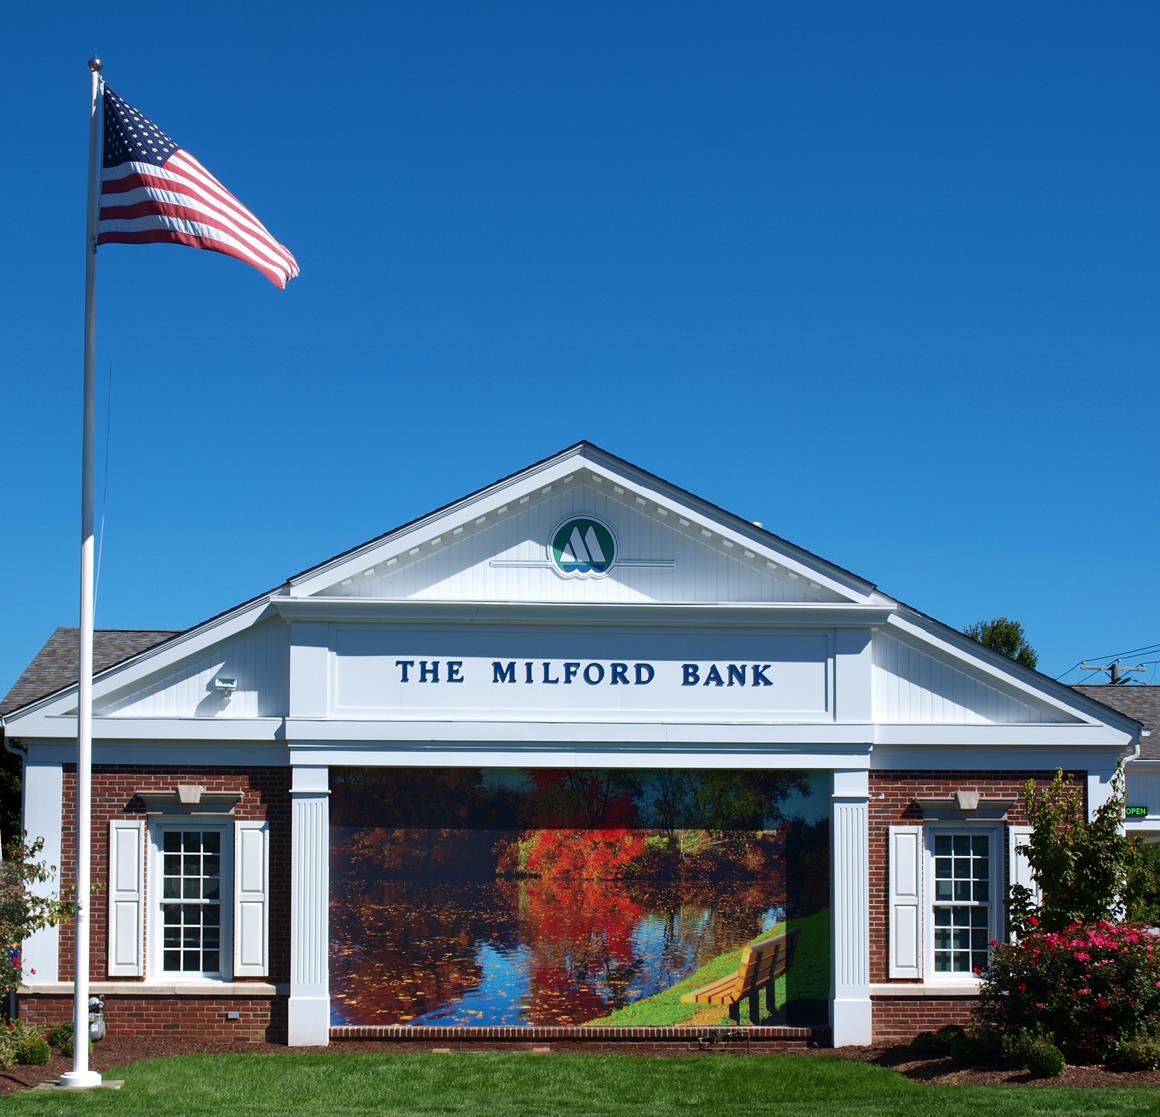 The Milford Bank Photo